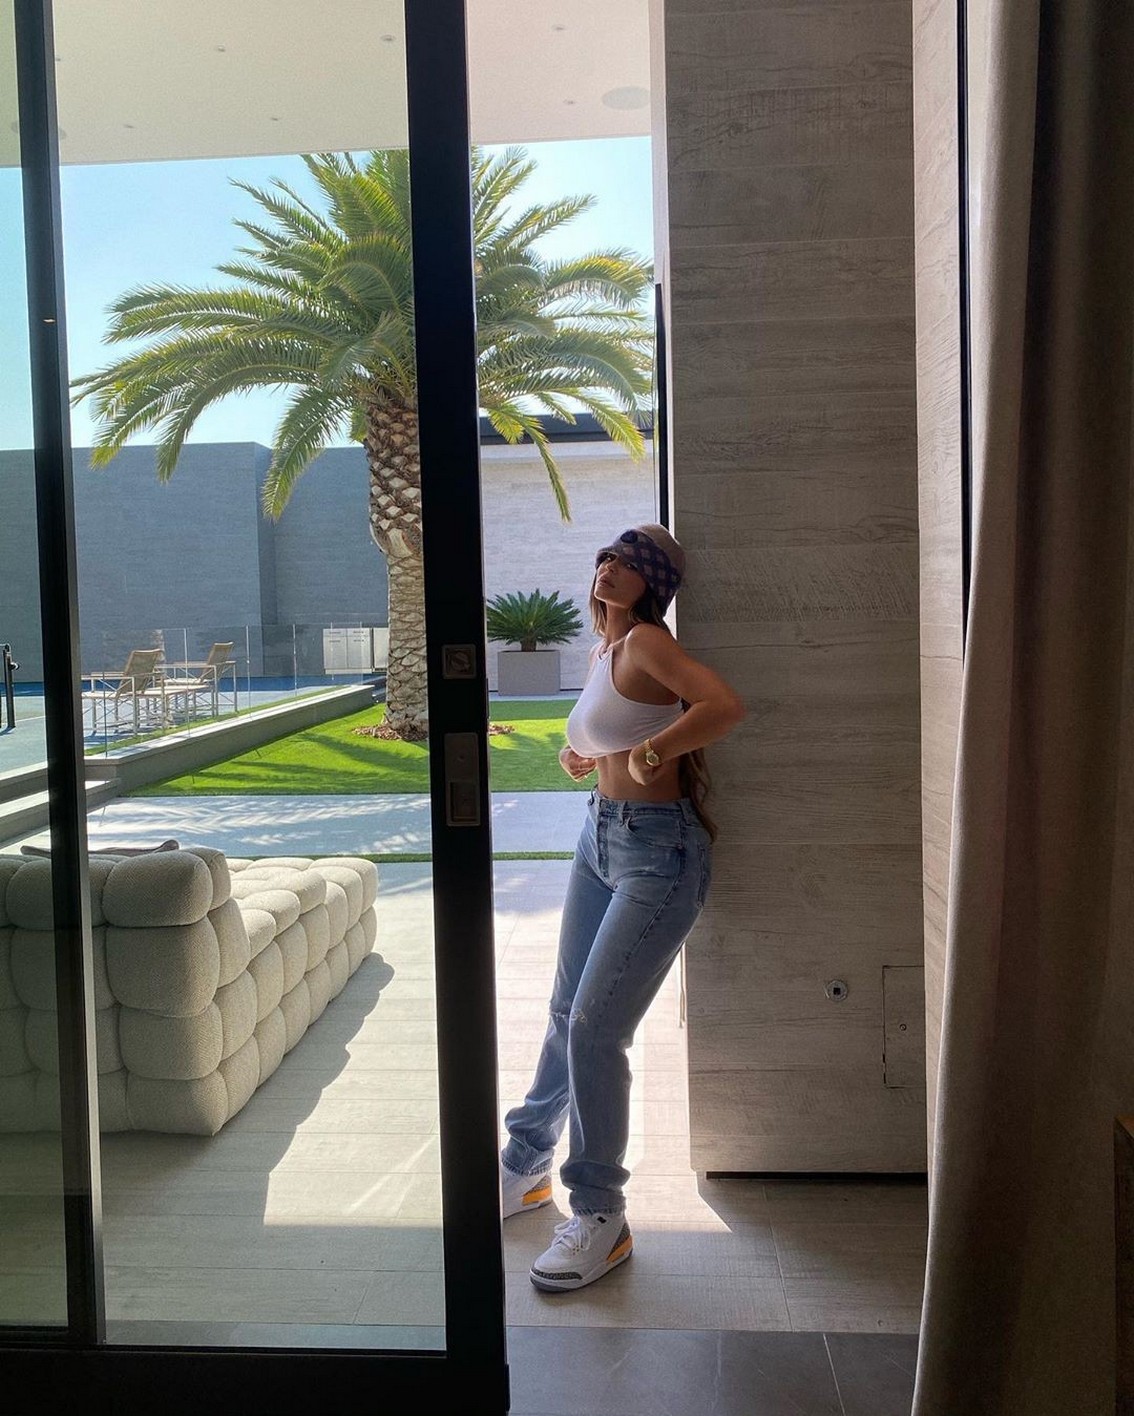 Kylie Jenner Big Tits Small Top TheFappeningPro 5 - Kylie Jenner Showed Off Big Tits In A White Top (5 Photos)